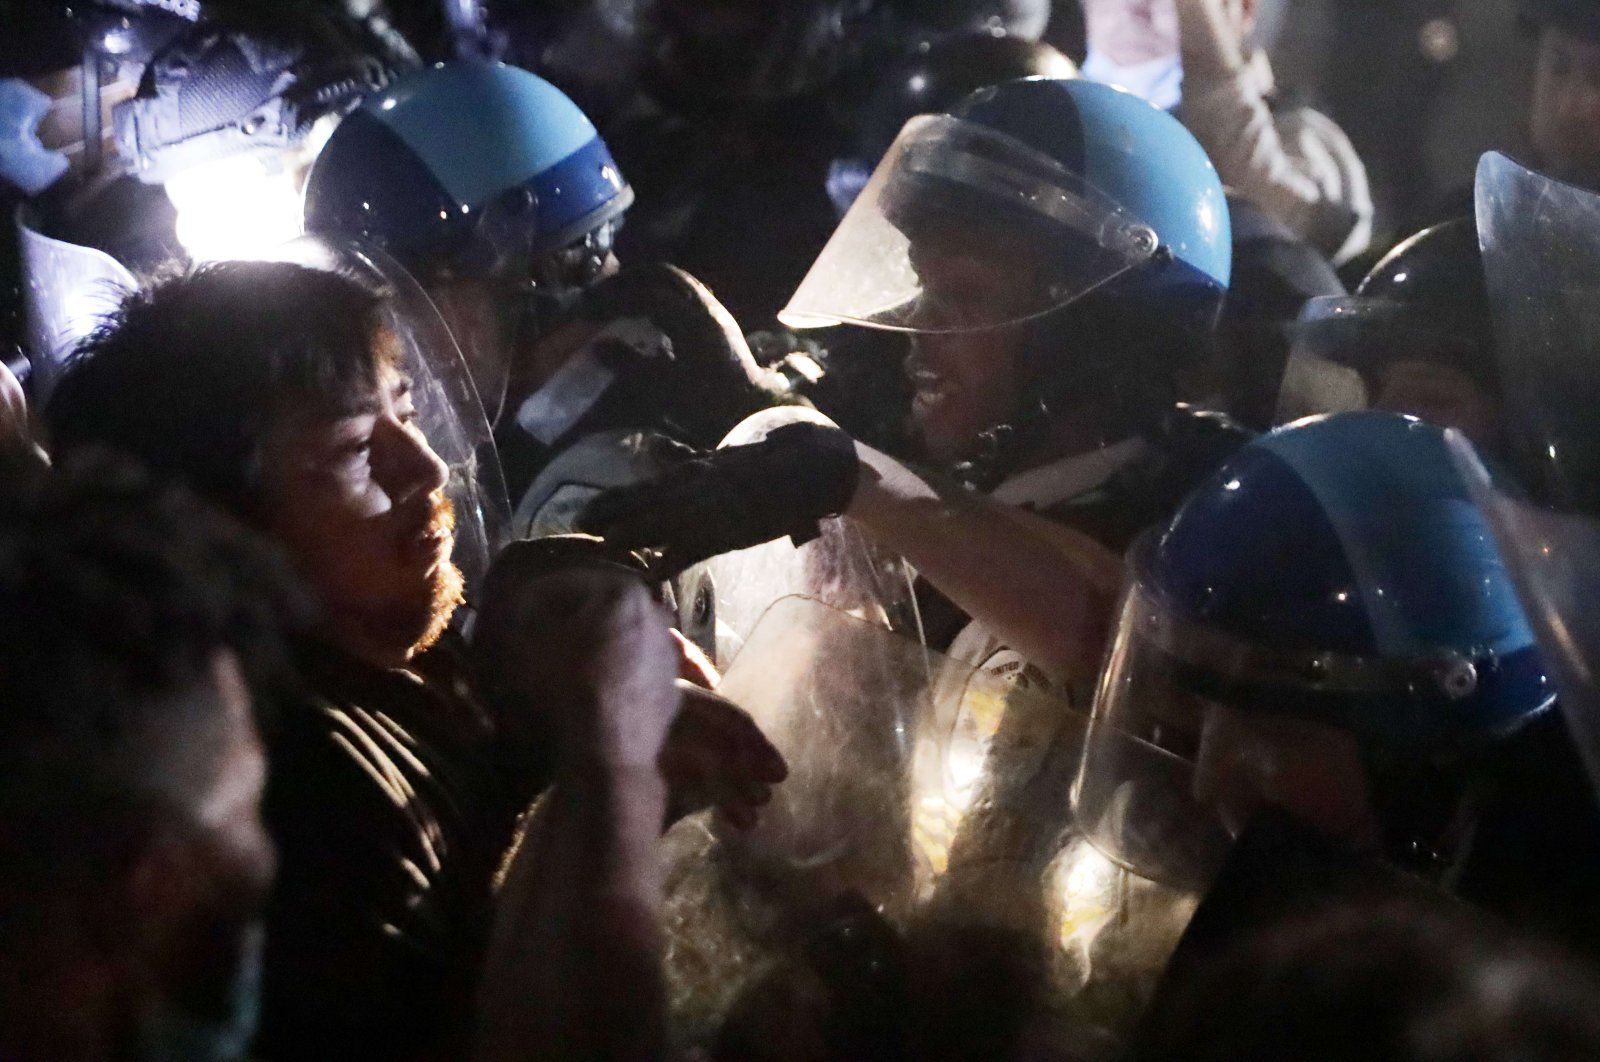 Demonstrators clash with police during a protest in response to the police killing of George Floyd in Lafayette Square Park in the early morning hours of May 30, 2020, in Washington. (AFP Photo)